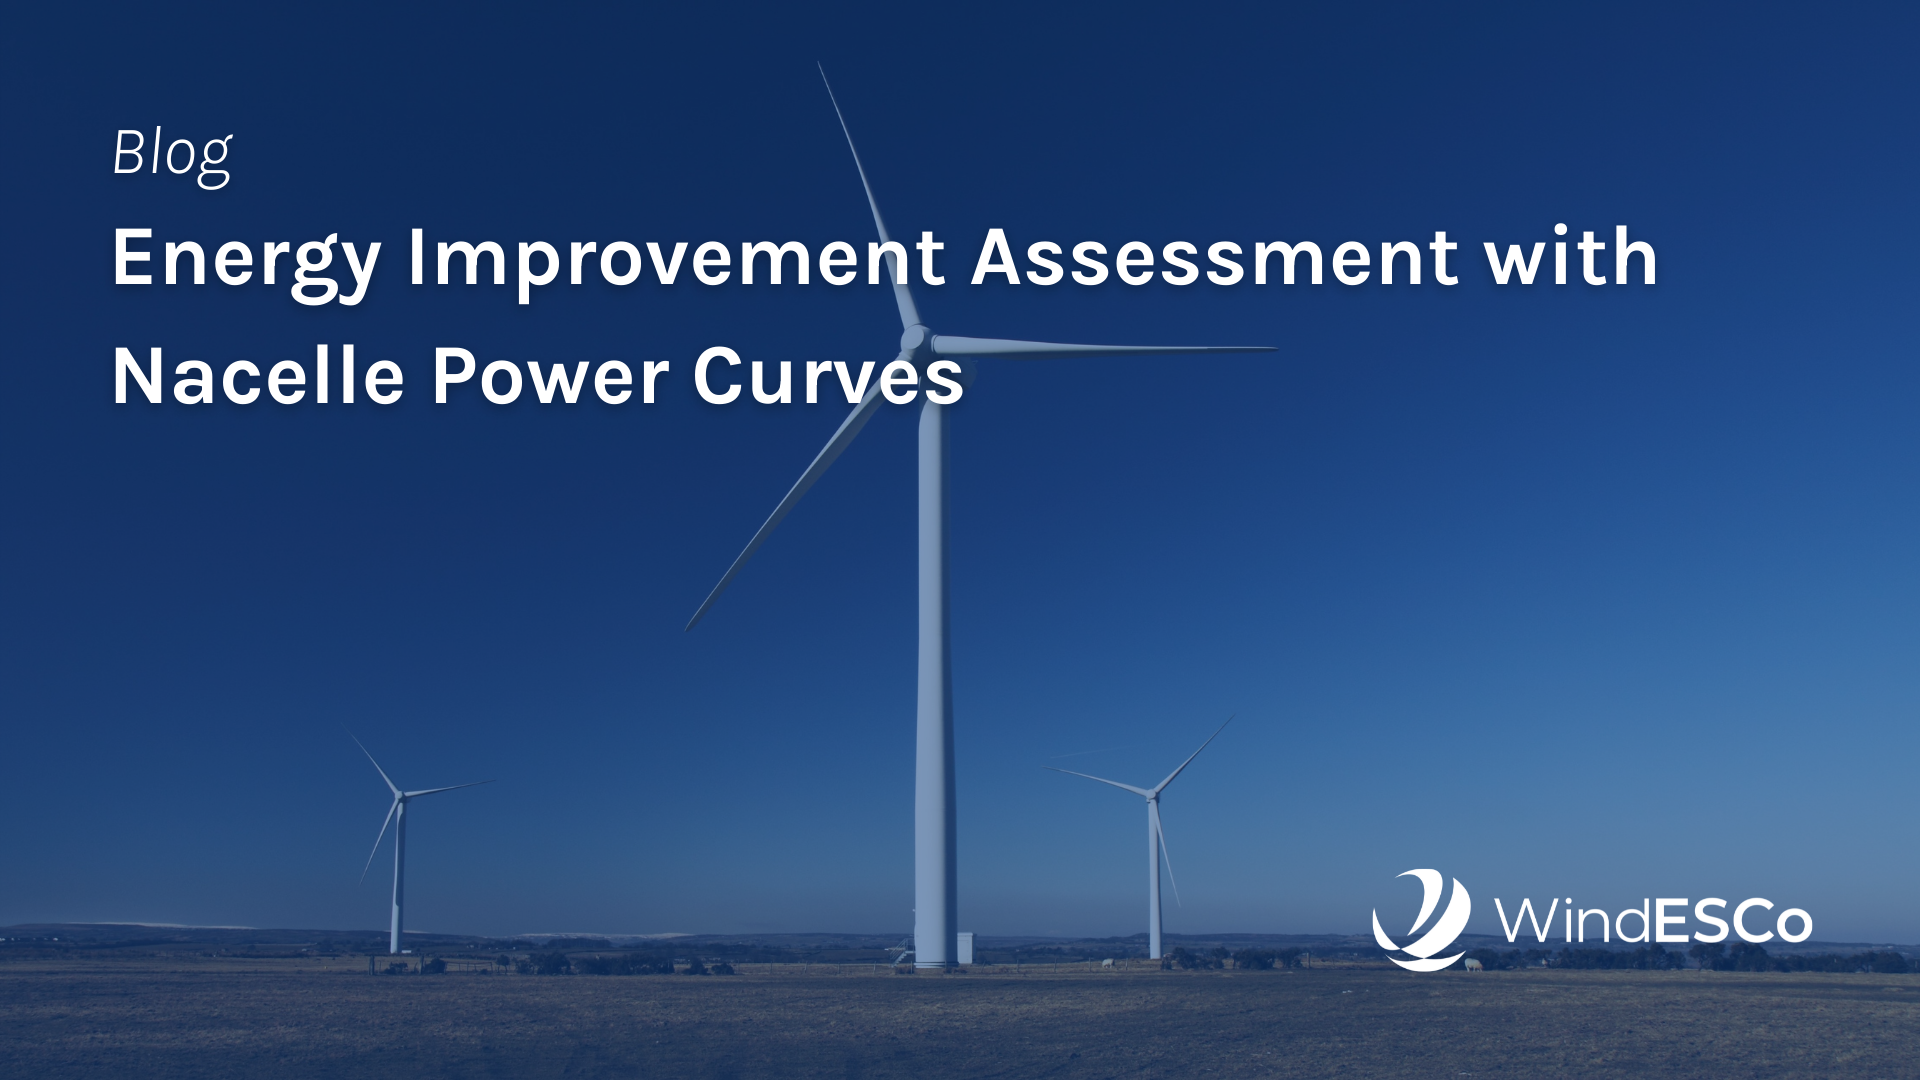 Energy Improvement Assessment with Nacelle Power Curves